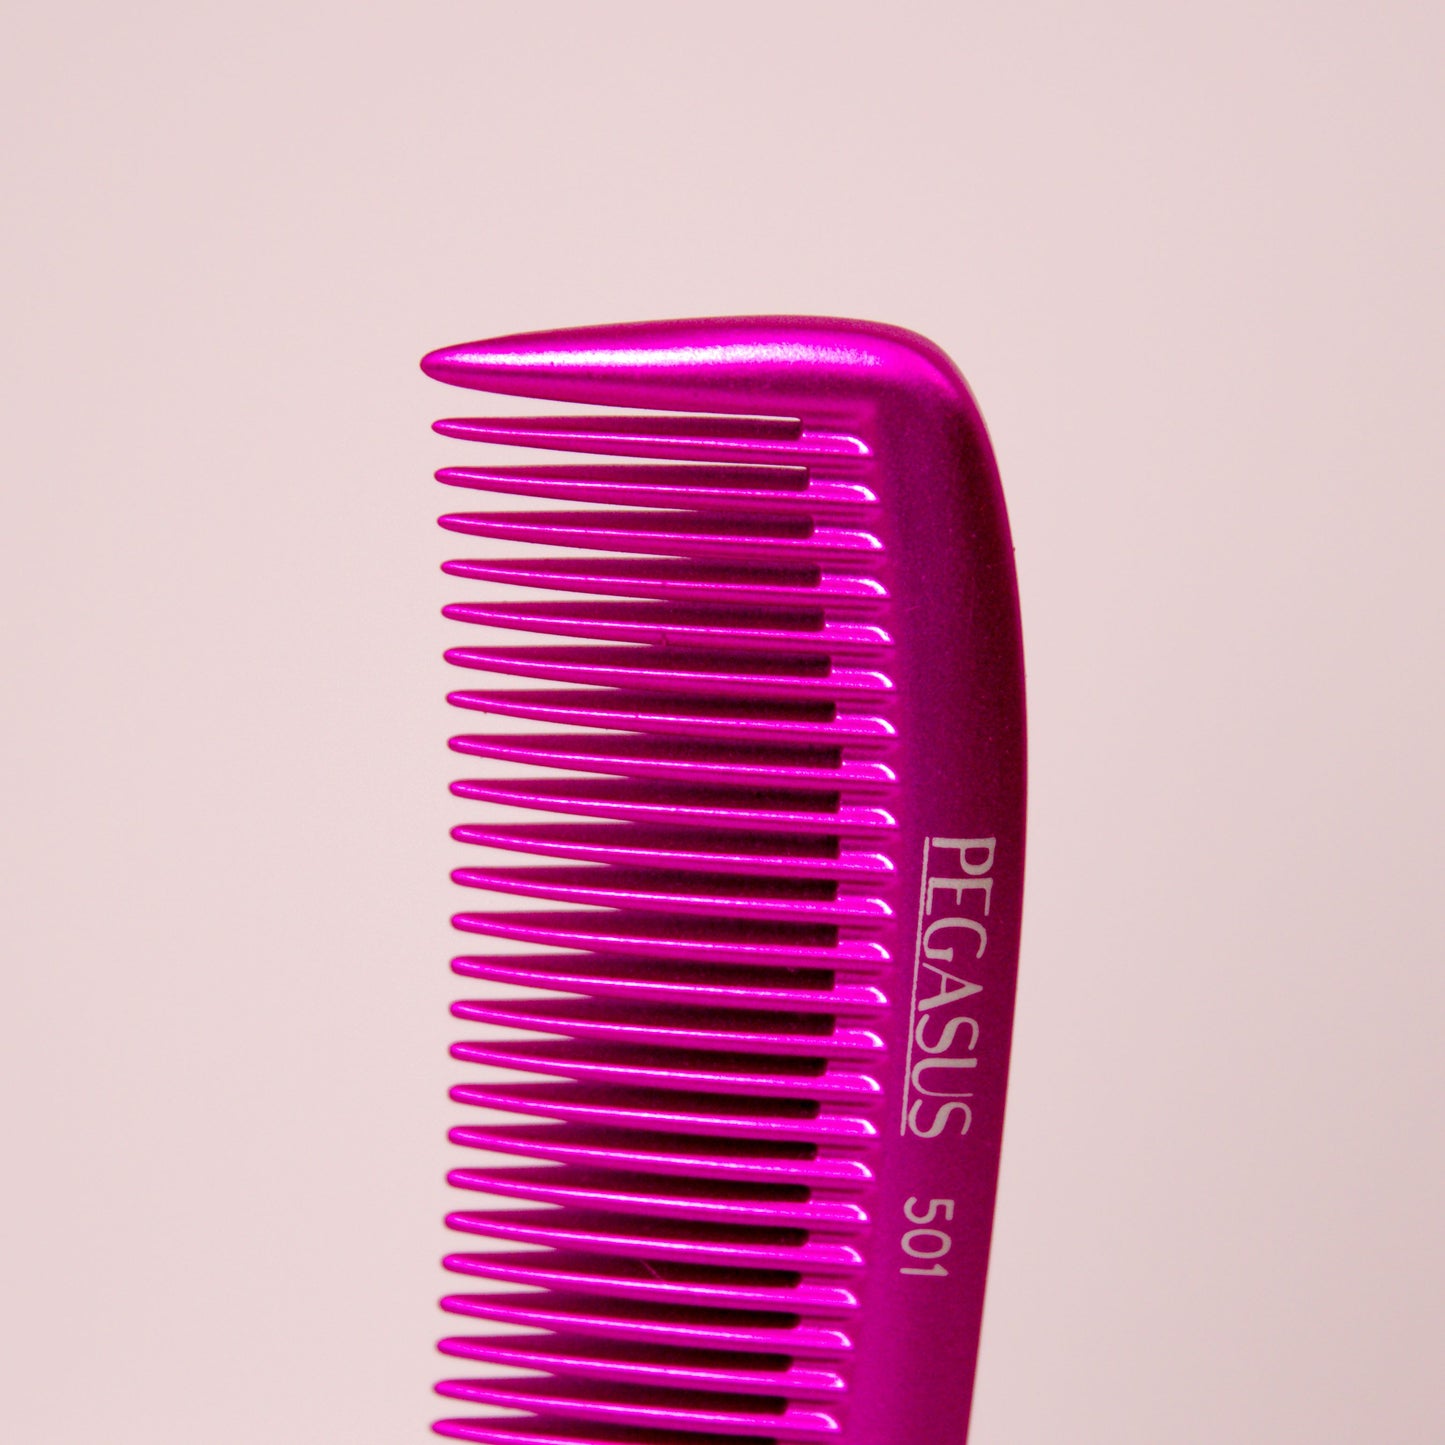 Pegasus MICOLOR 501, 9in Hard Rubber Handle Comb, Handmade, Seamless, Smooth Edges, Anti Static, Heat and Chemically Resistant, Wet Hair, Everyday Grooming Comb | Peines de goma dura - Pink